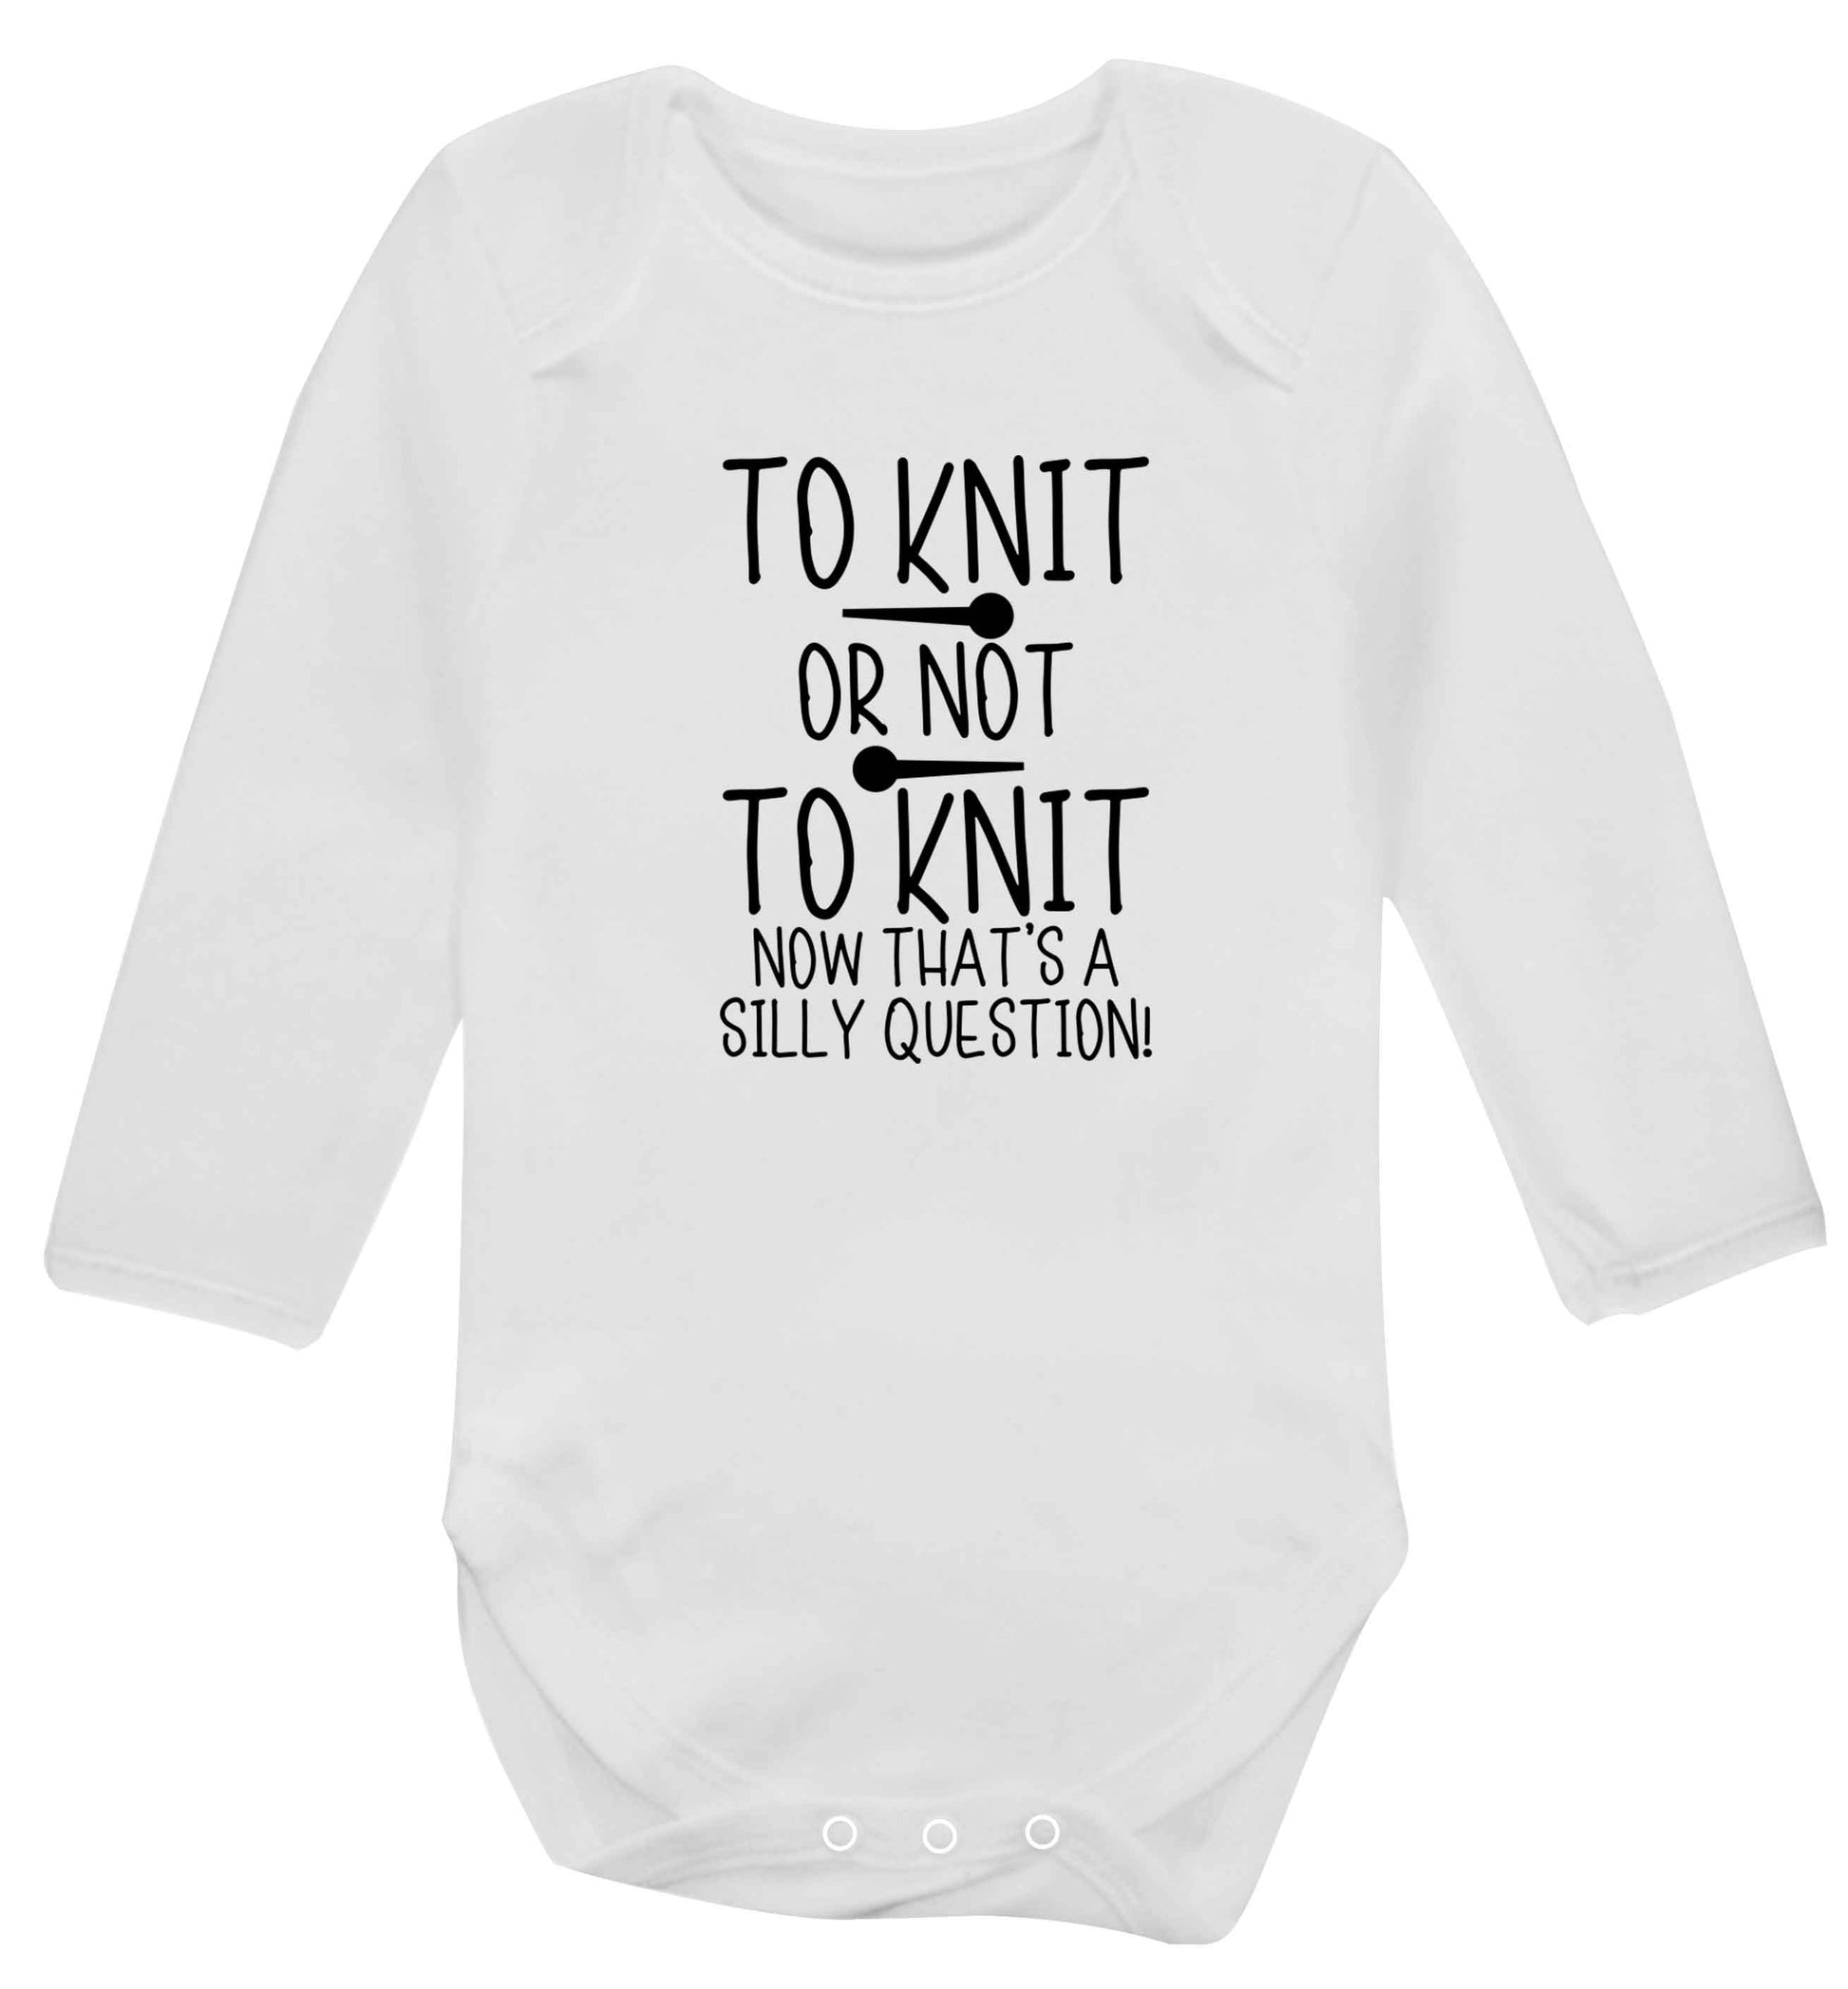 To knit or not to knit now that's a silly question baby vest long sleeved white 6-12 months